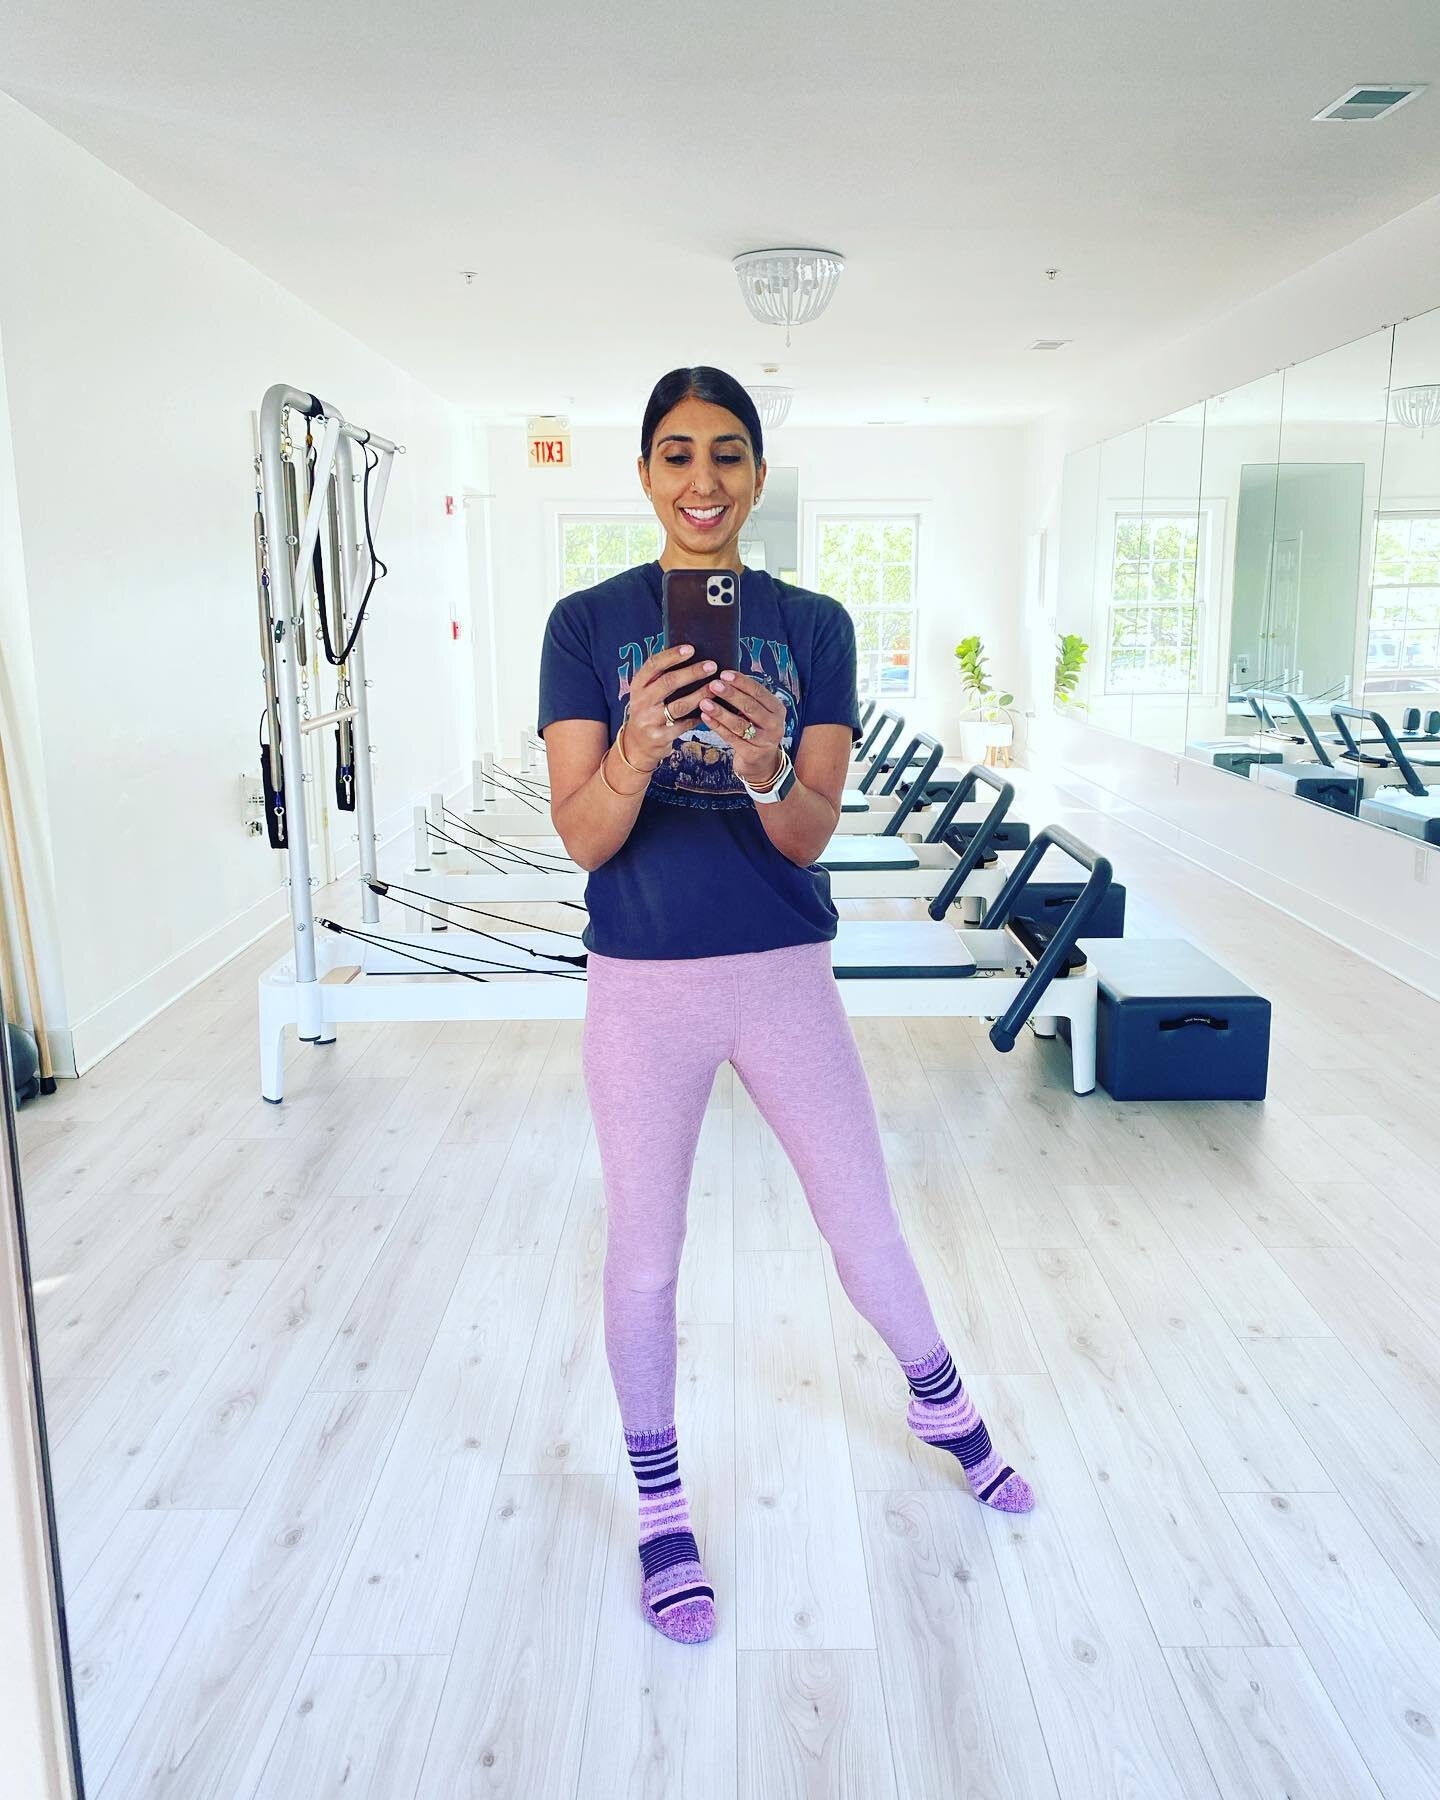 Hello Dear Pilates friends!  It&rsquo;s been a minute since I&rsquo;ve been on the &lsquo;gram!  Yes, not ideal when you&rsquo;re starting a new studio business!  Haha lol.  It&rsquo;s on my massive list to bring a beautiful, curated vibe to Little B